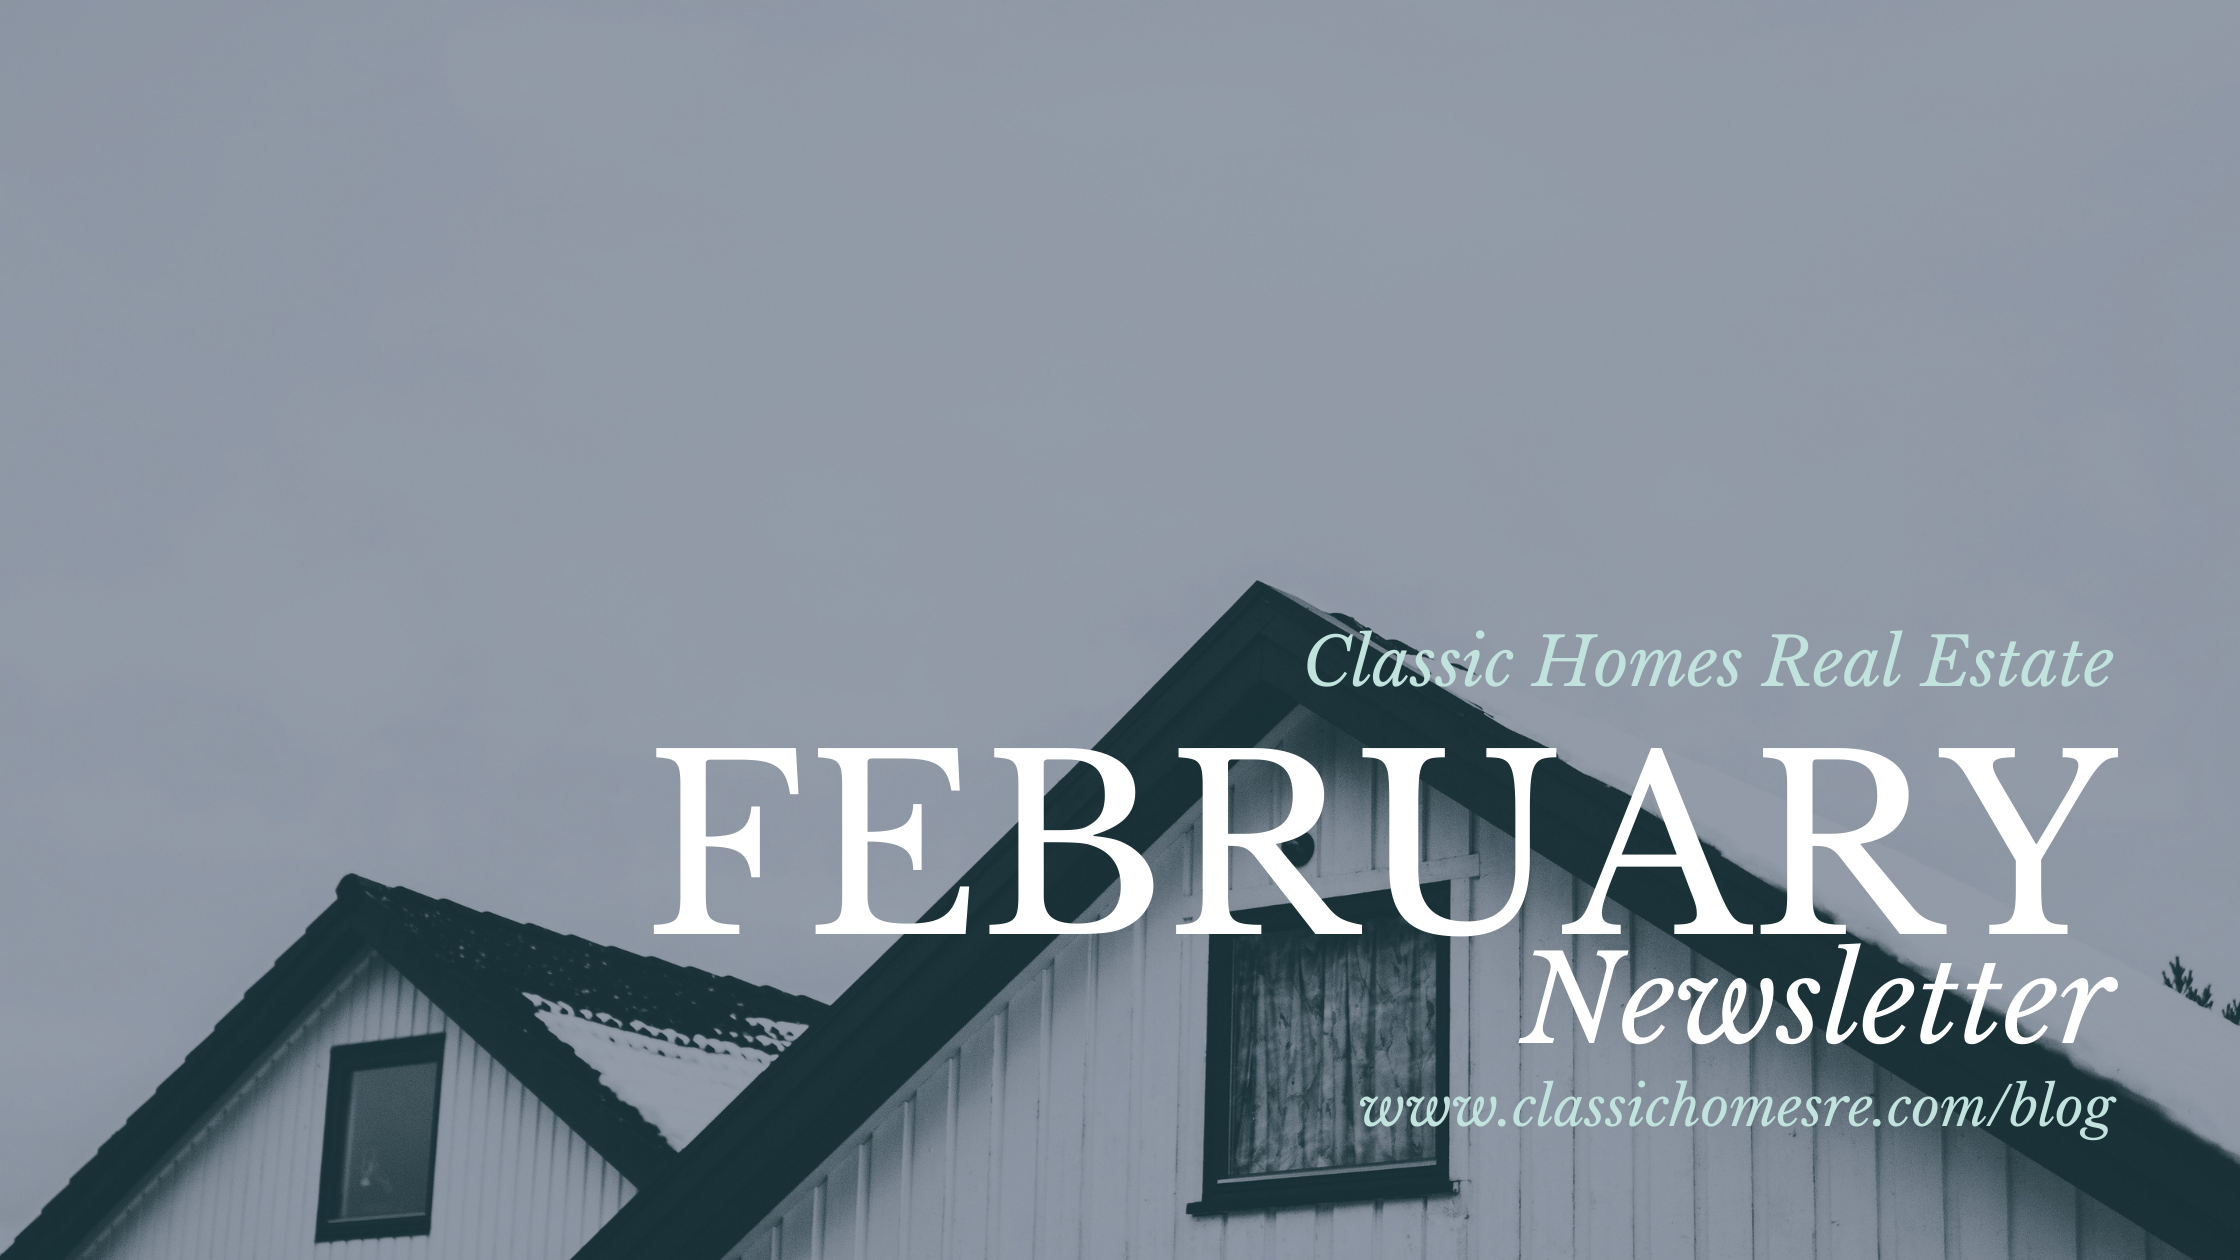 Classic Homes Real Estate Newsletter - Month of February